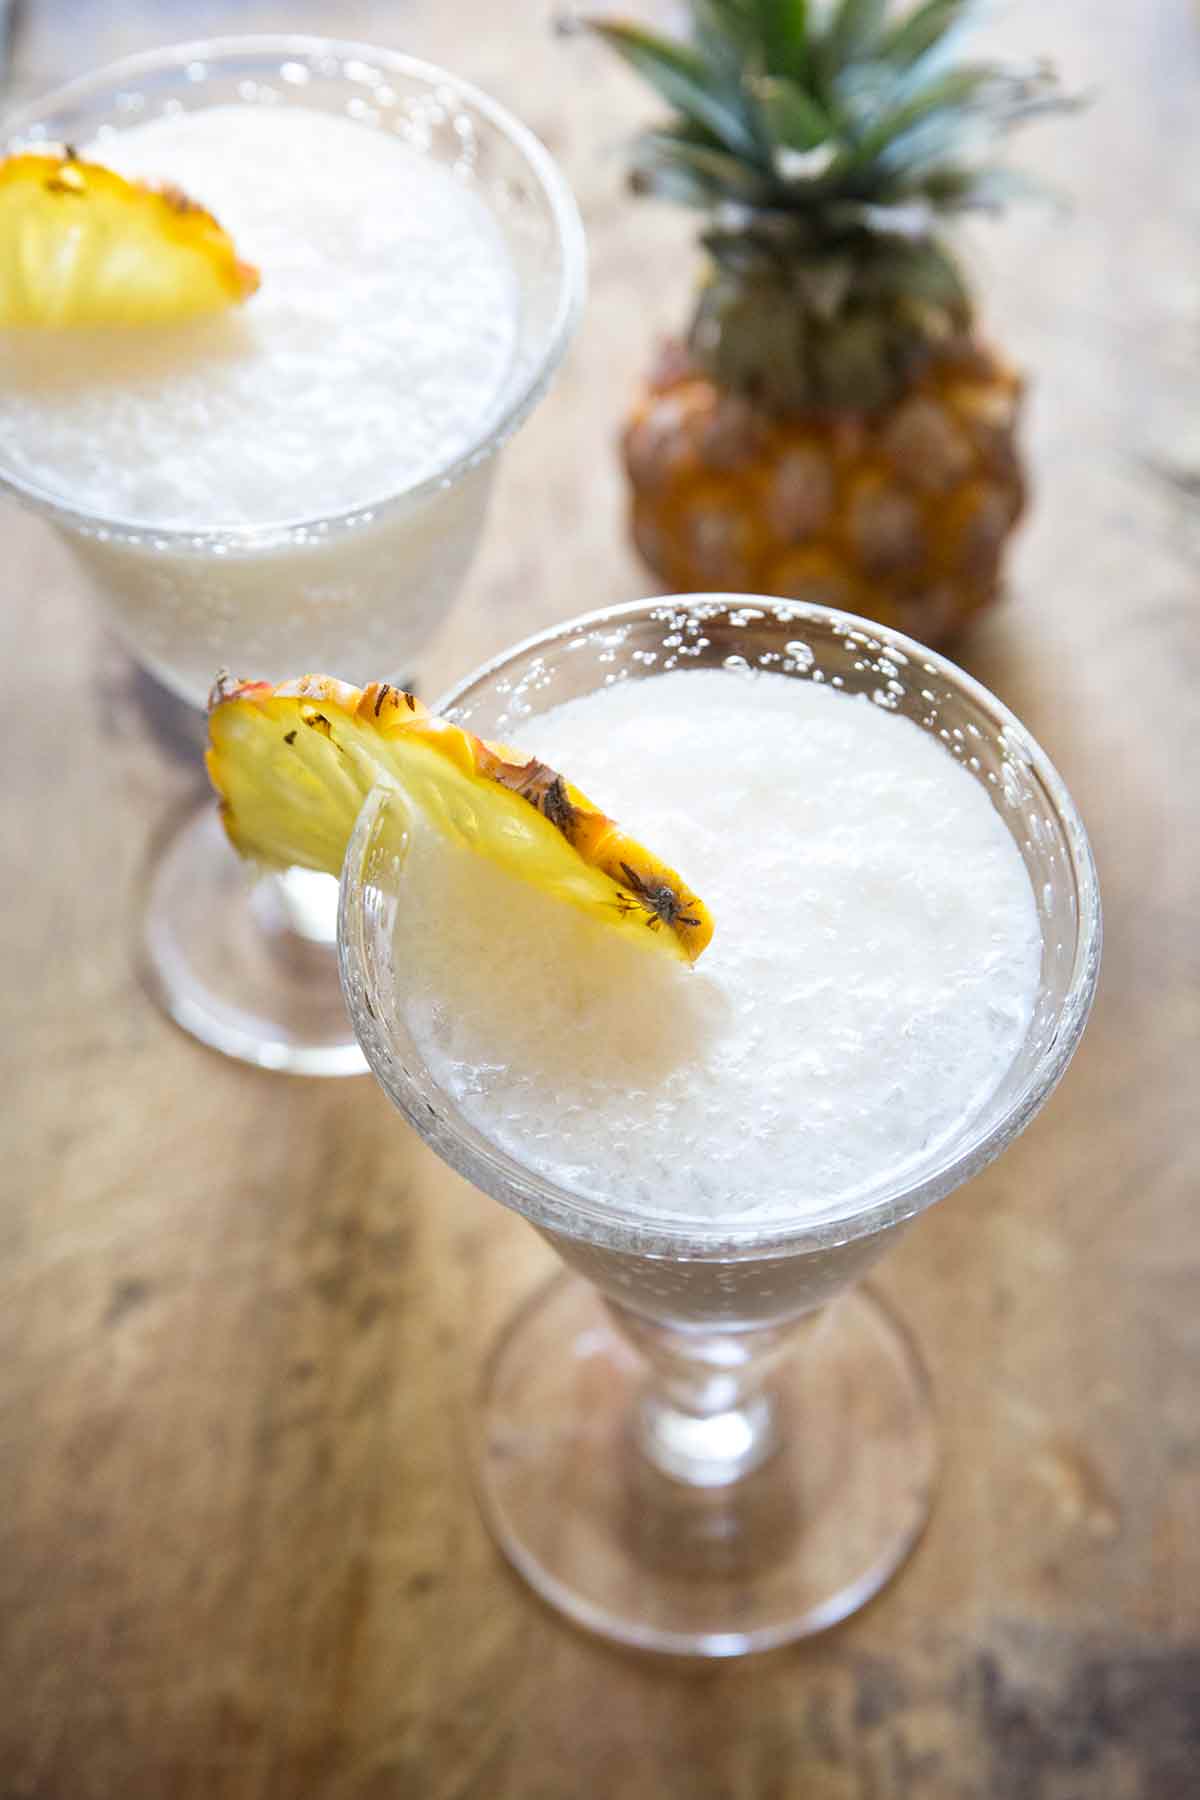 Two pina coladas, garnished with a pineapple wheel and a whole pineapple nearby.